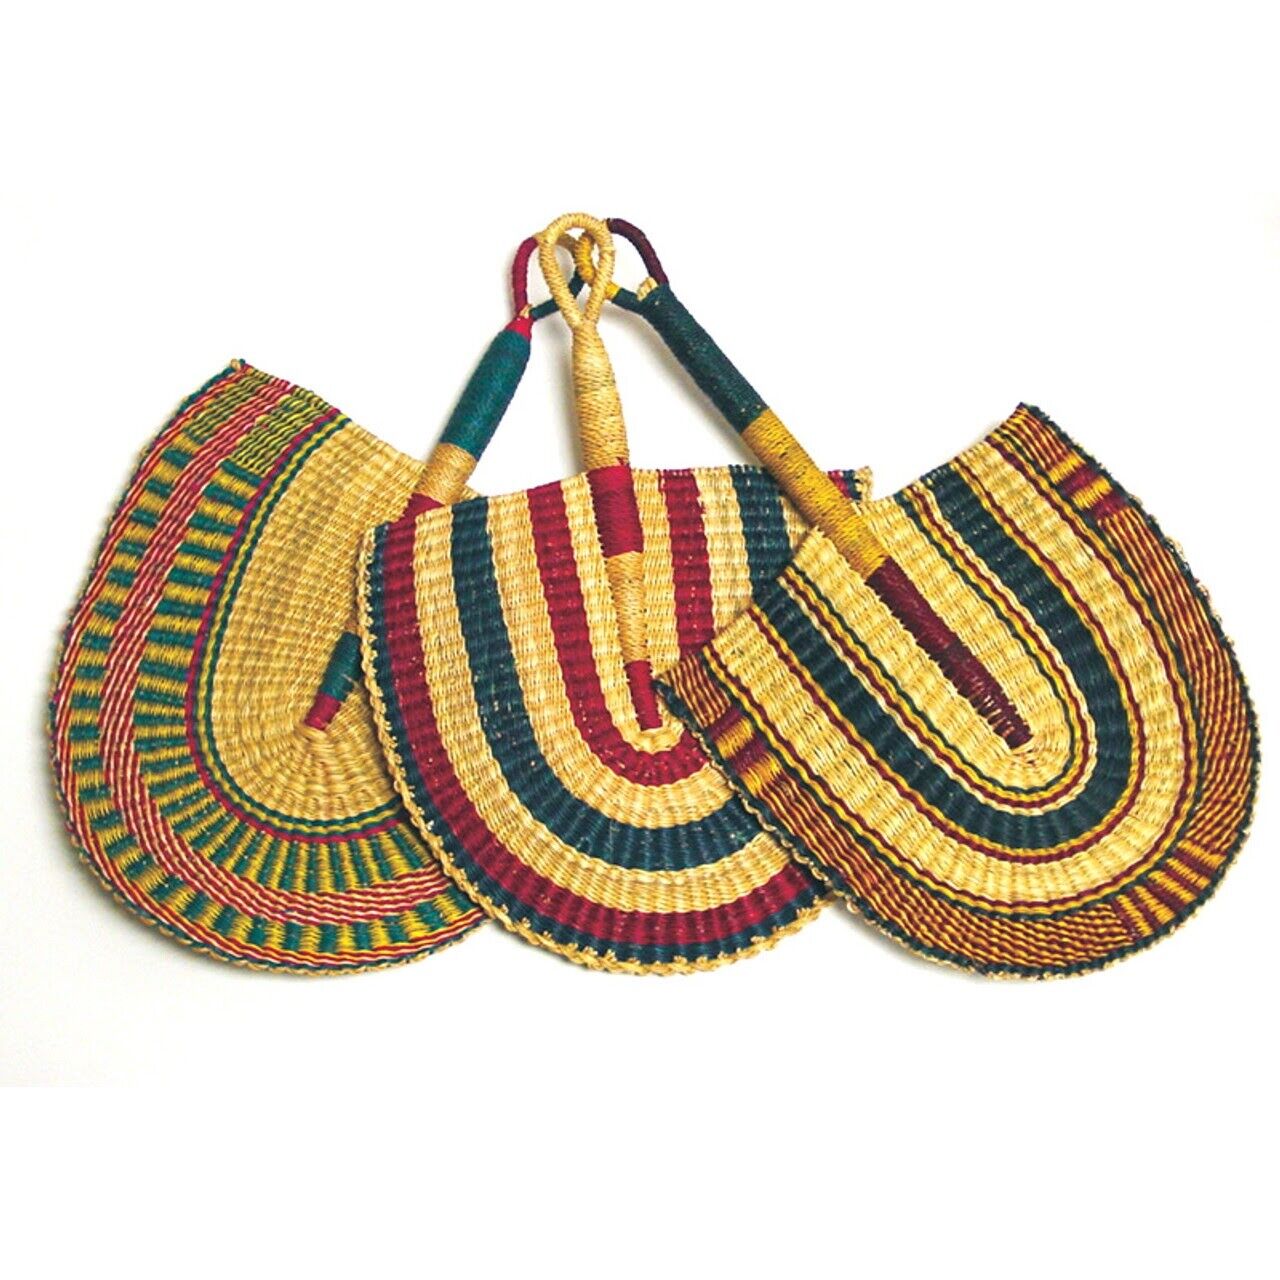 Burkina Faso Hand Woven Fans 16 inches set of 3